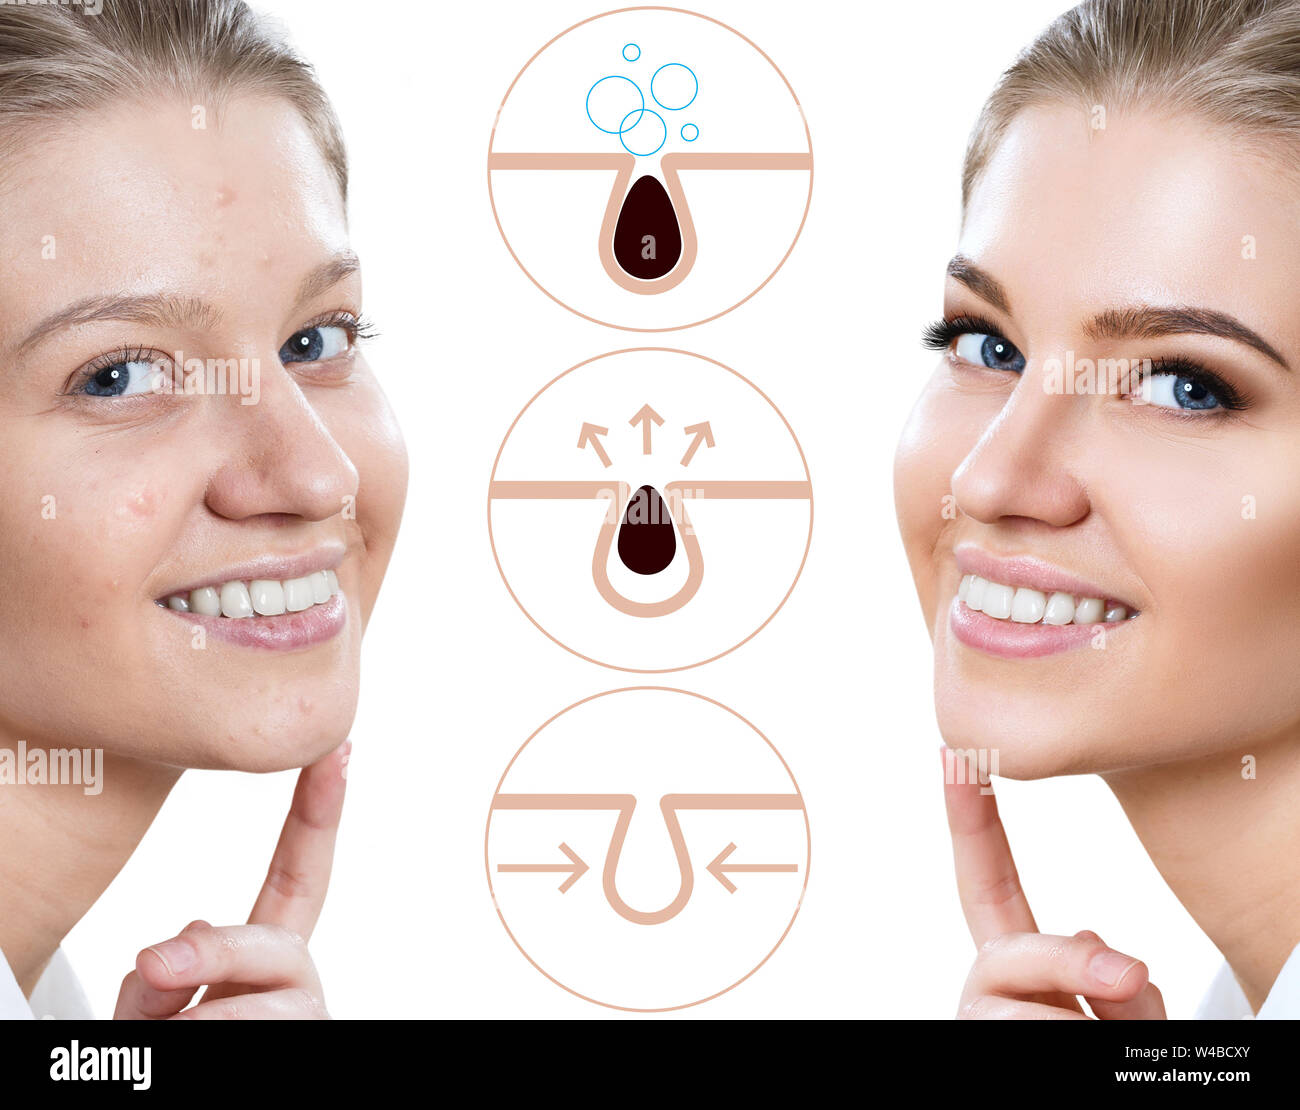 Graphically shows how to pollute and clean the pores on face. Stock Photo